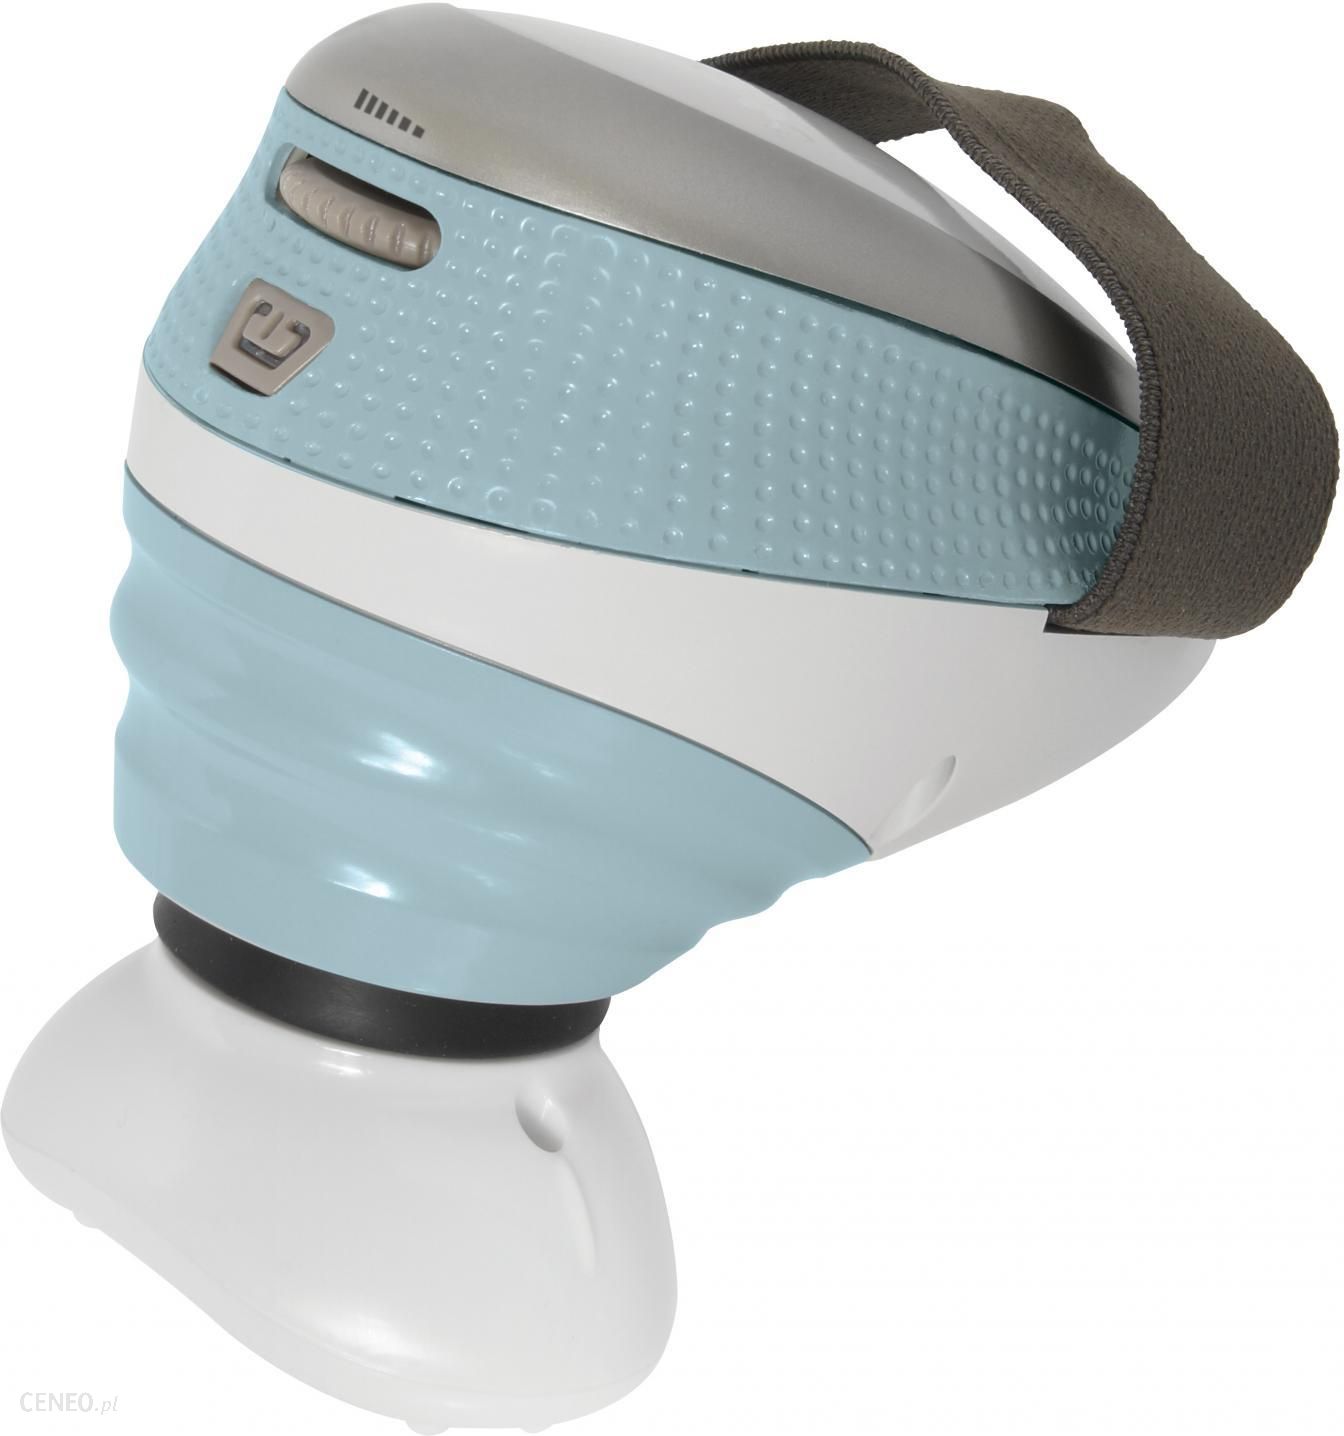  HoMedics Masażer antycellulitowy CELL-100-EU